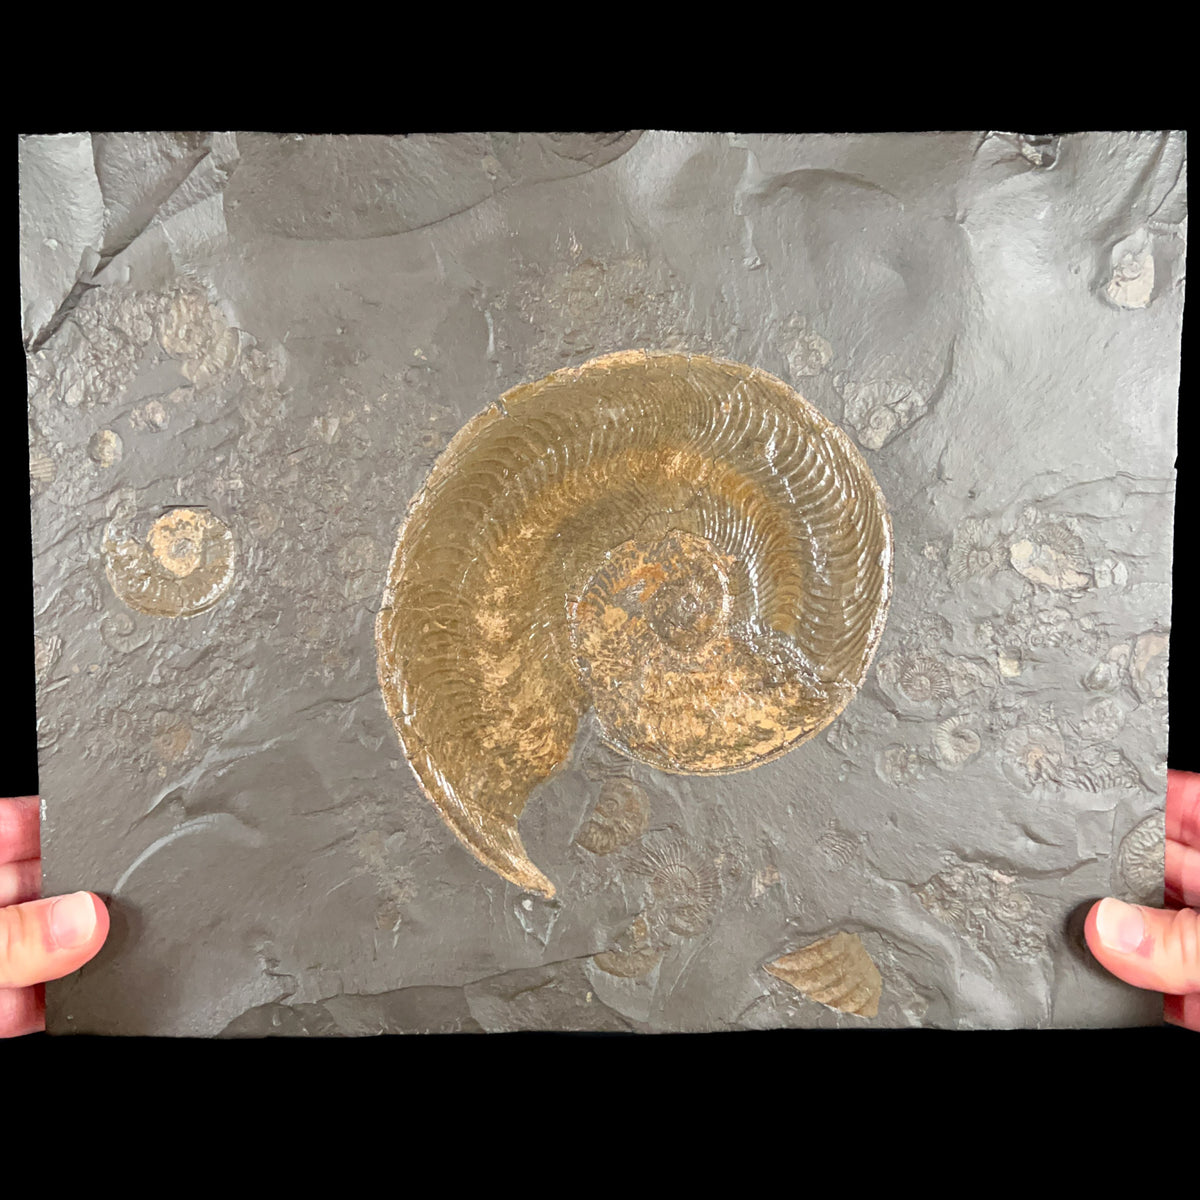 Large Pyritized Harpoceras Ammonite Fossil Plate